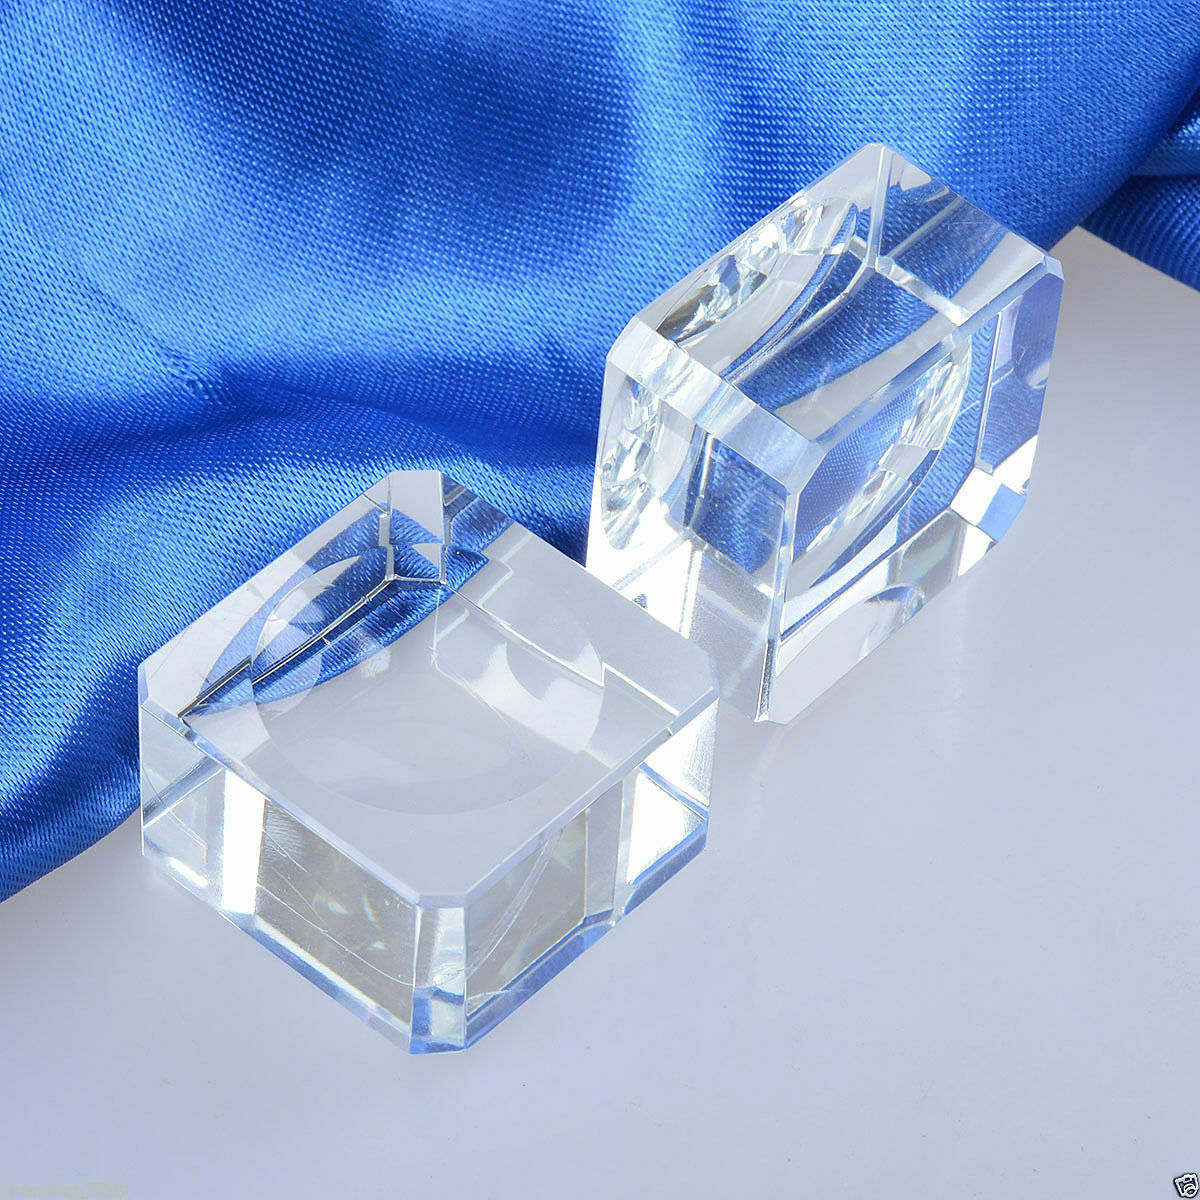 1Pcs Crystal Display Stand Holder For Crystal Ball Sphere ORB Globe Stones